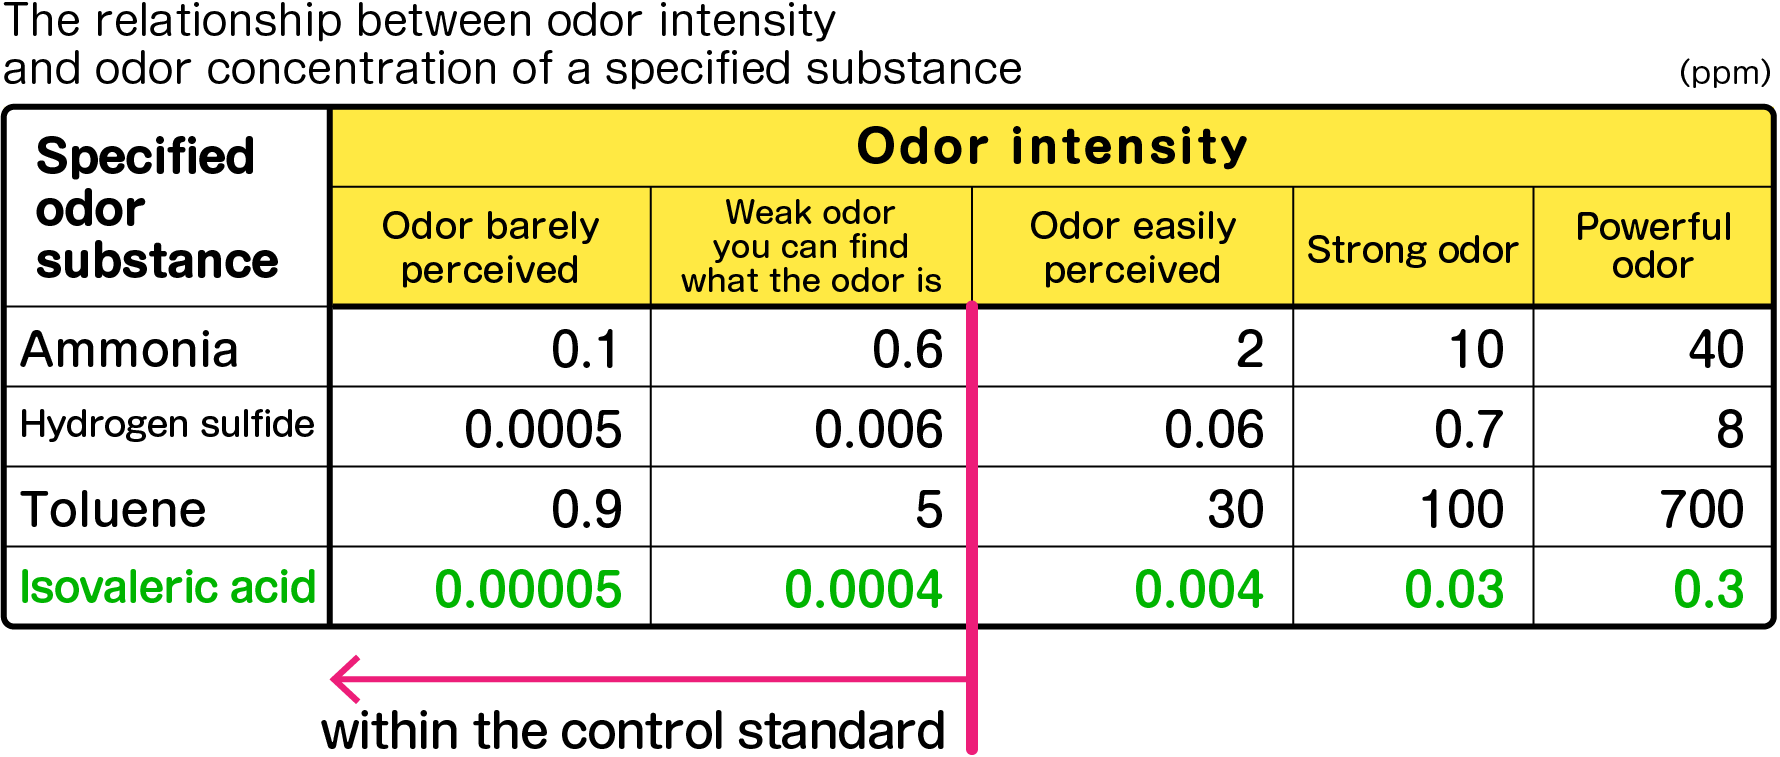 The relationship between odor intensity and odor concentration of a specified substance